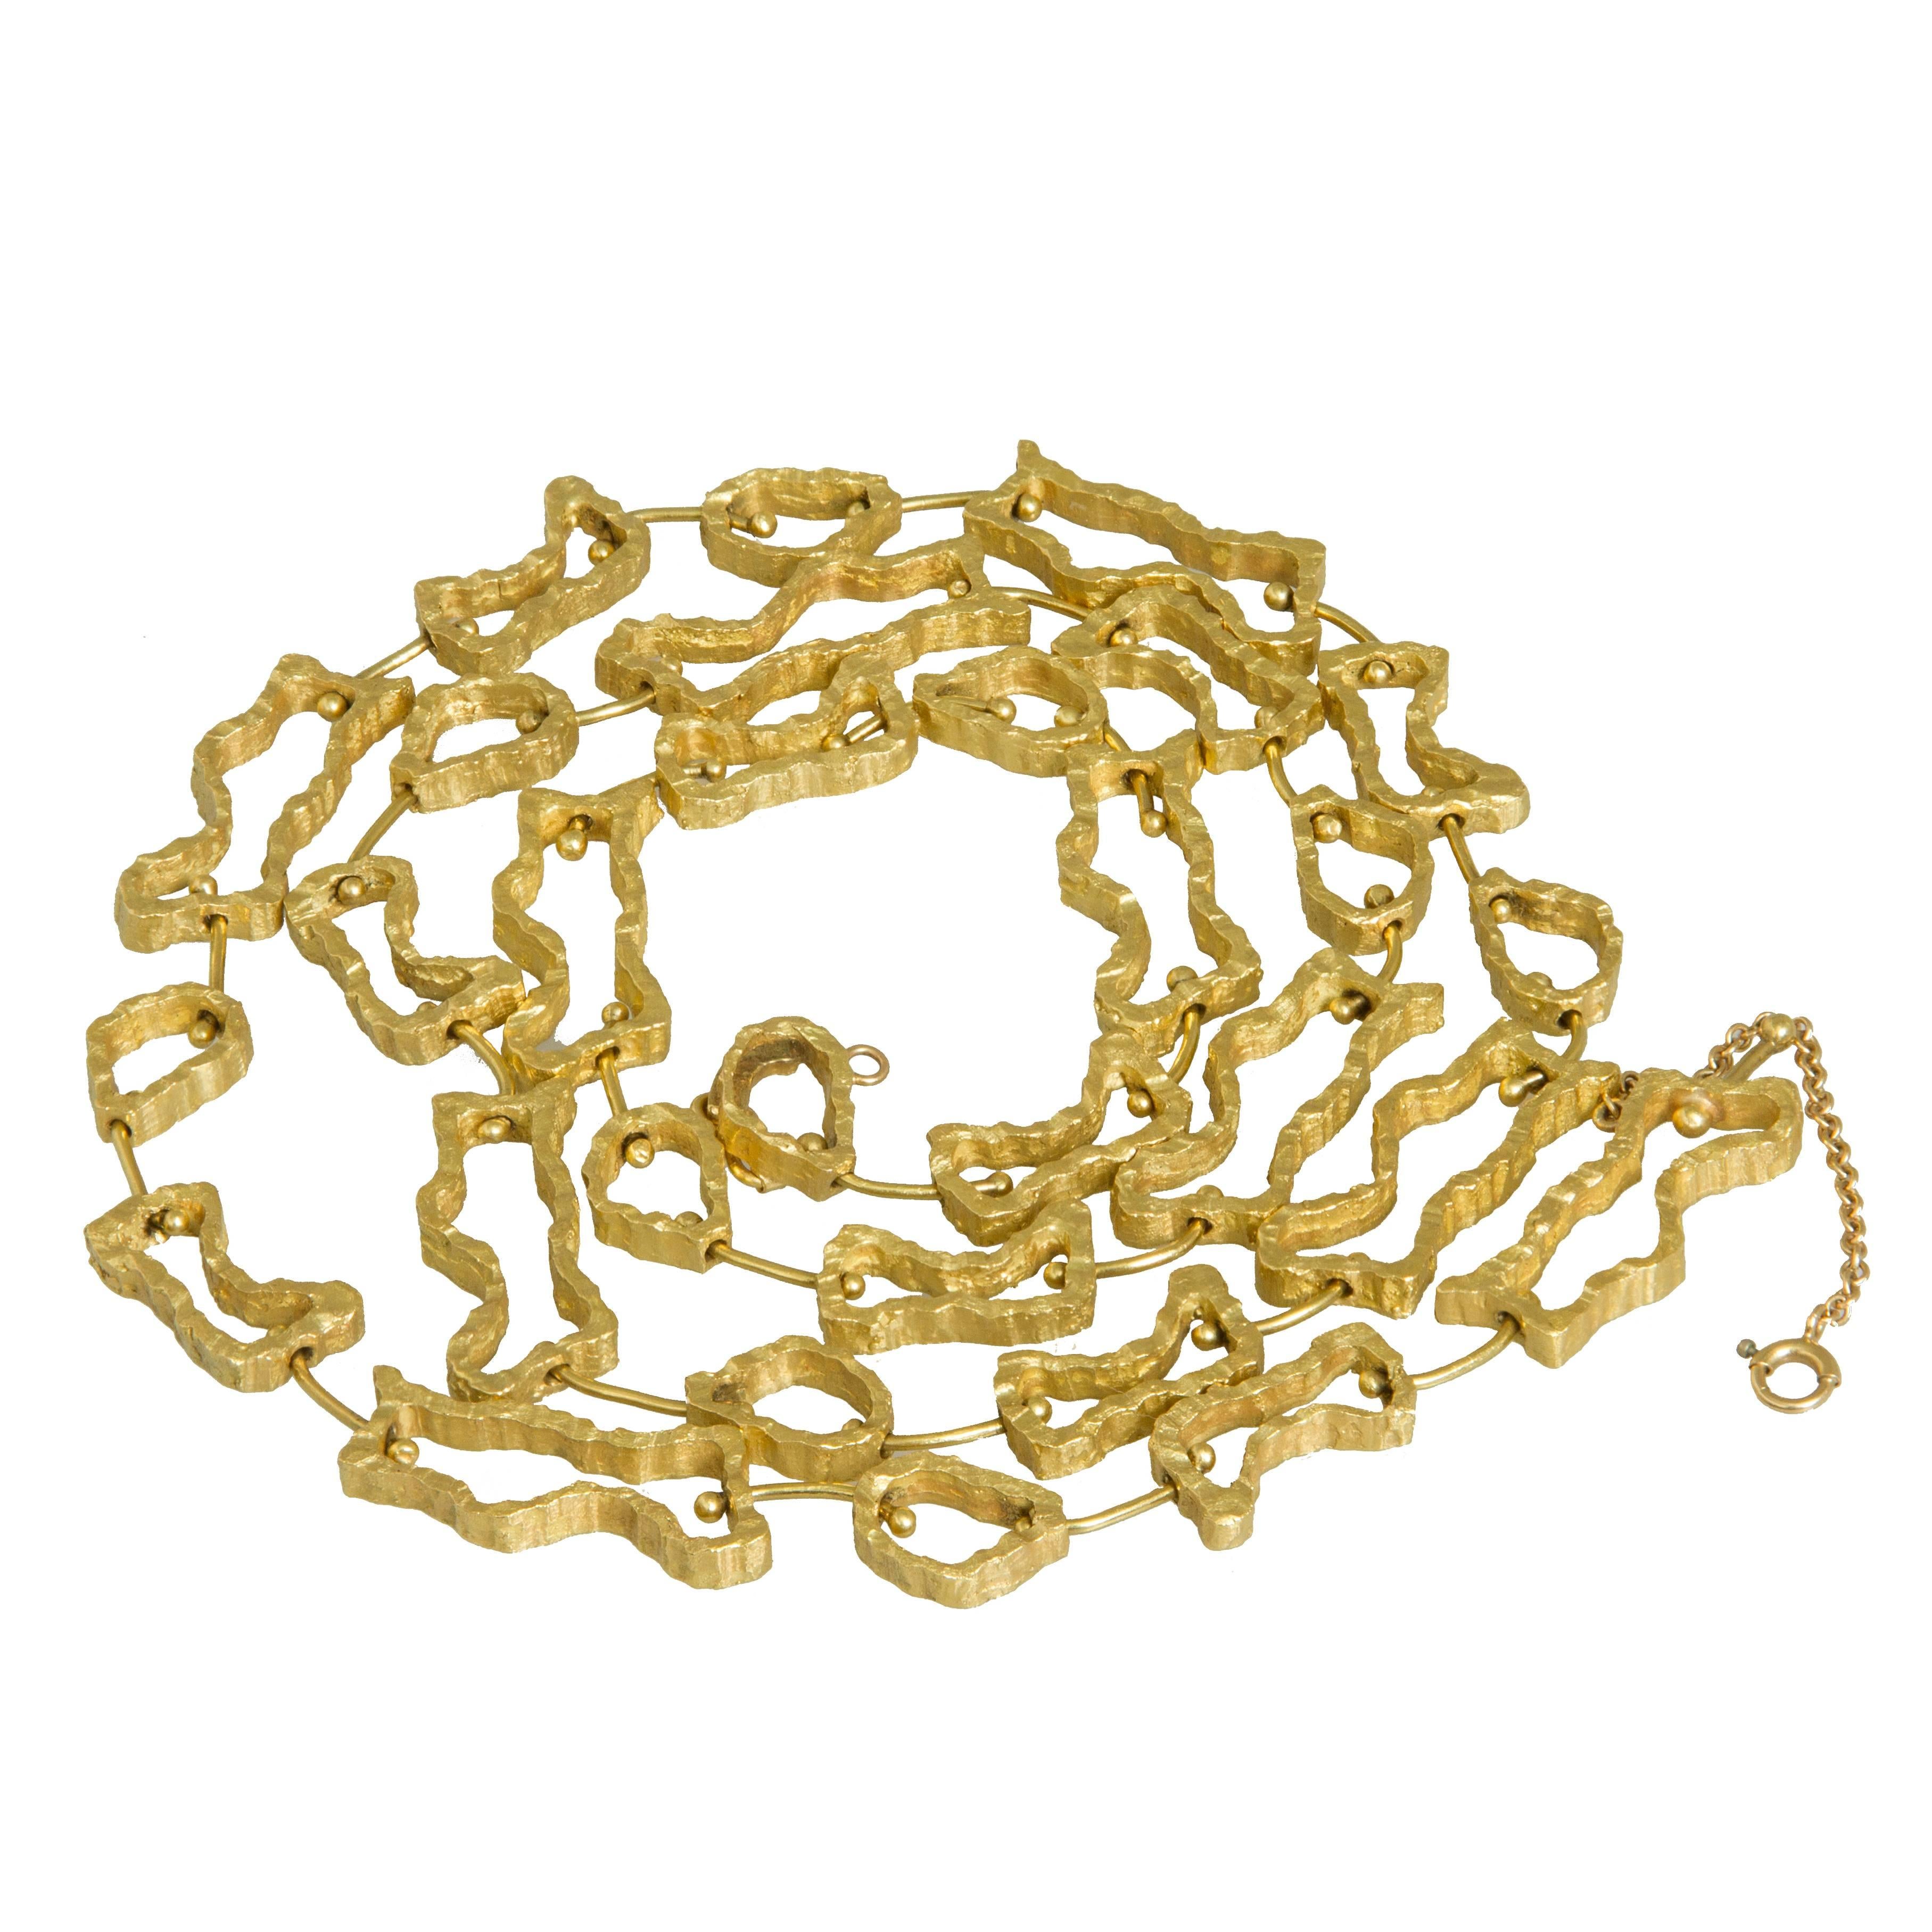 Beautifully constructed, this necklace consists of biomorphically textured links.